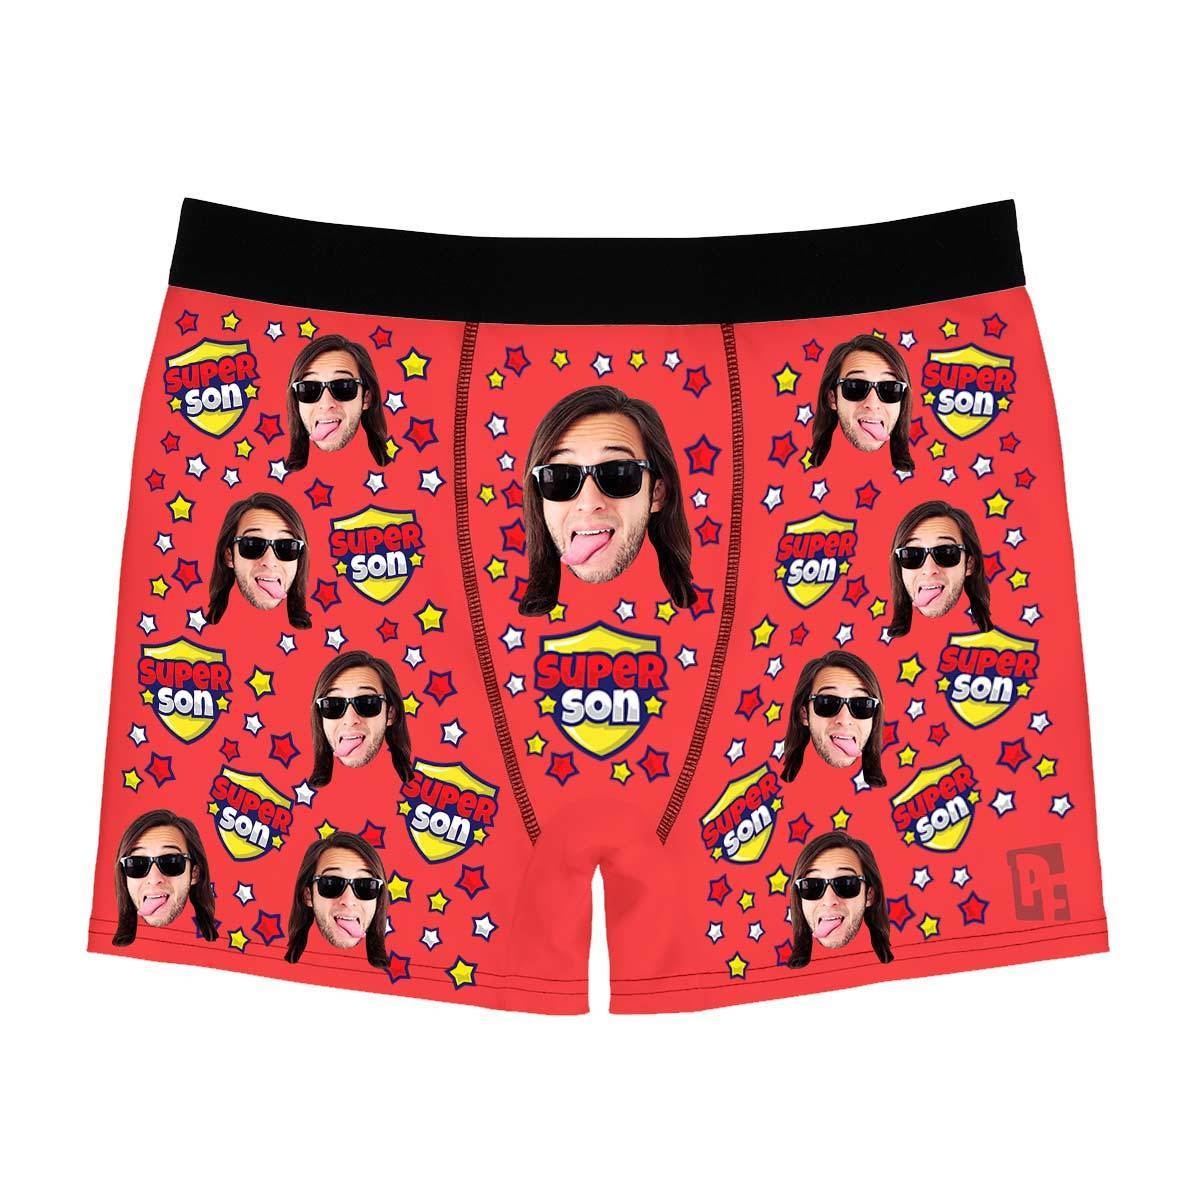 Red Super son men's boxer briefs personalized with photo printed on them